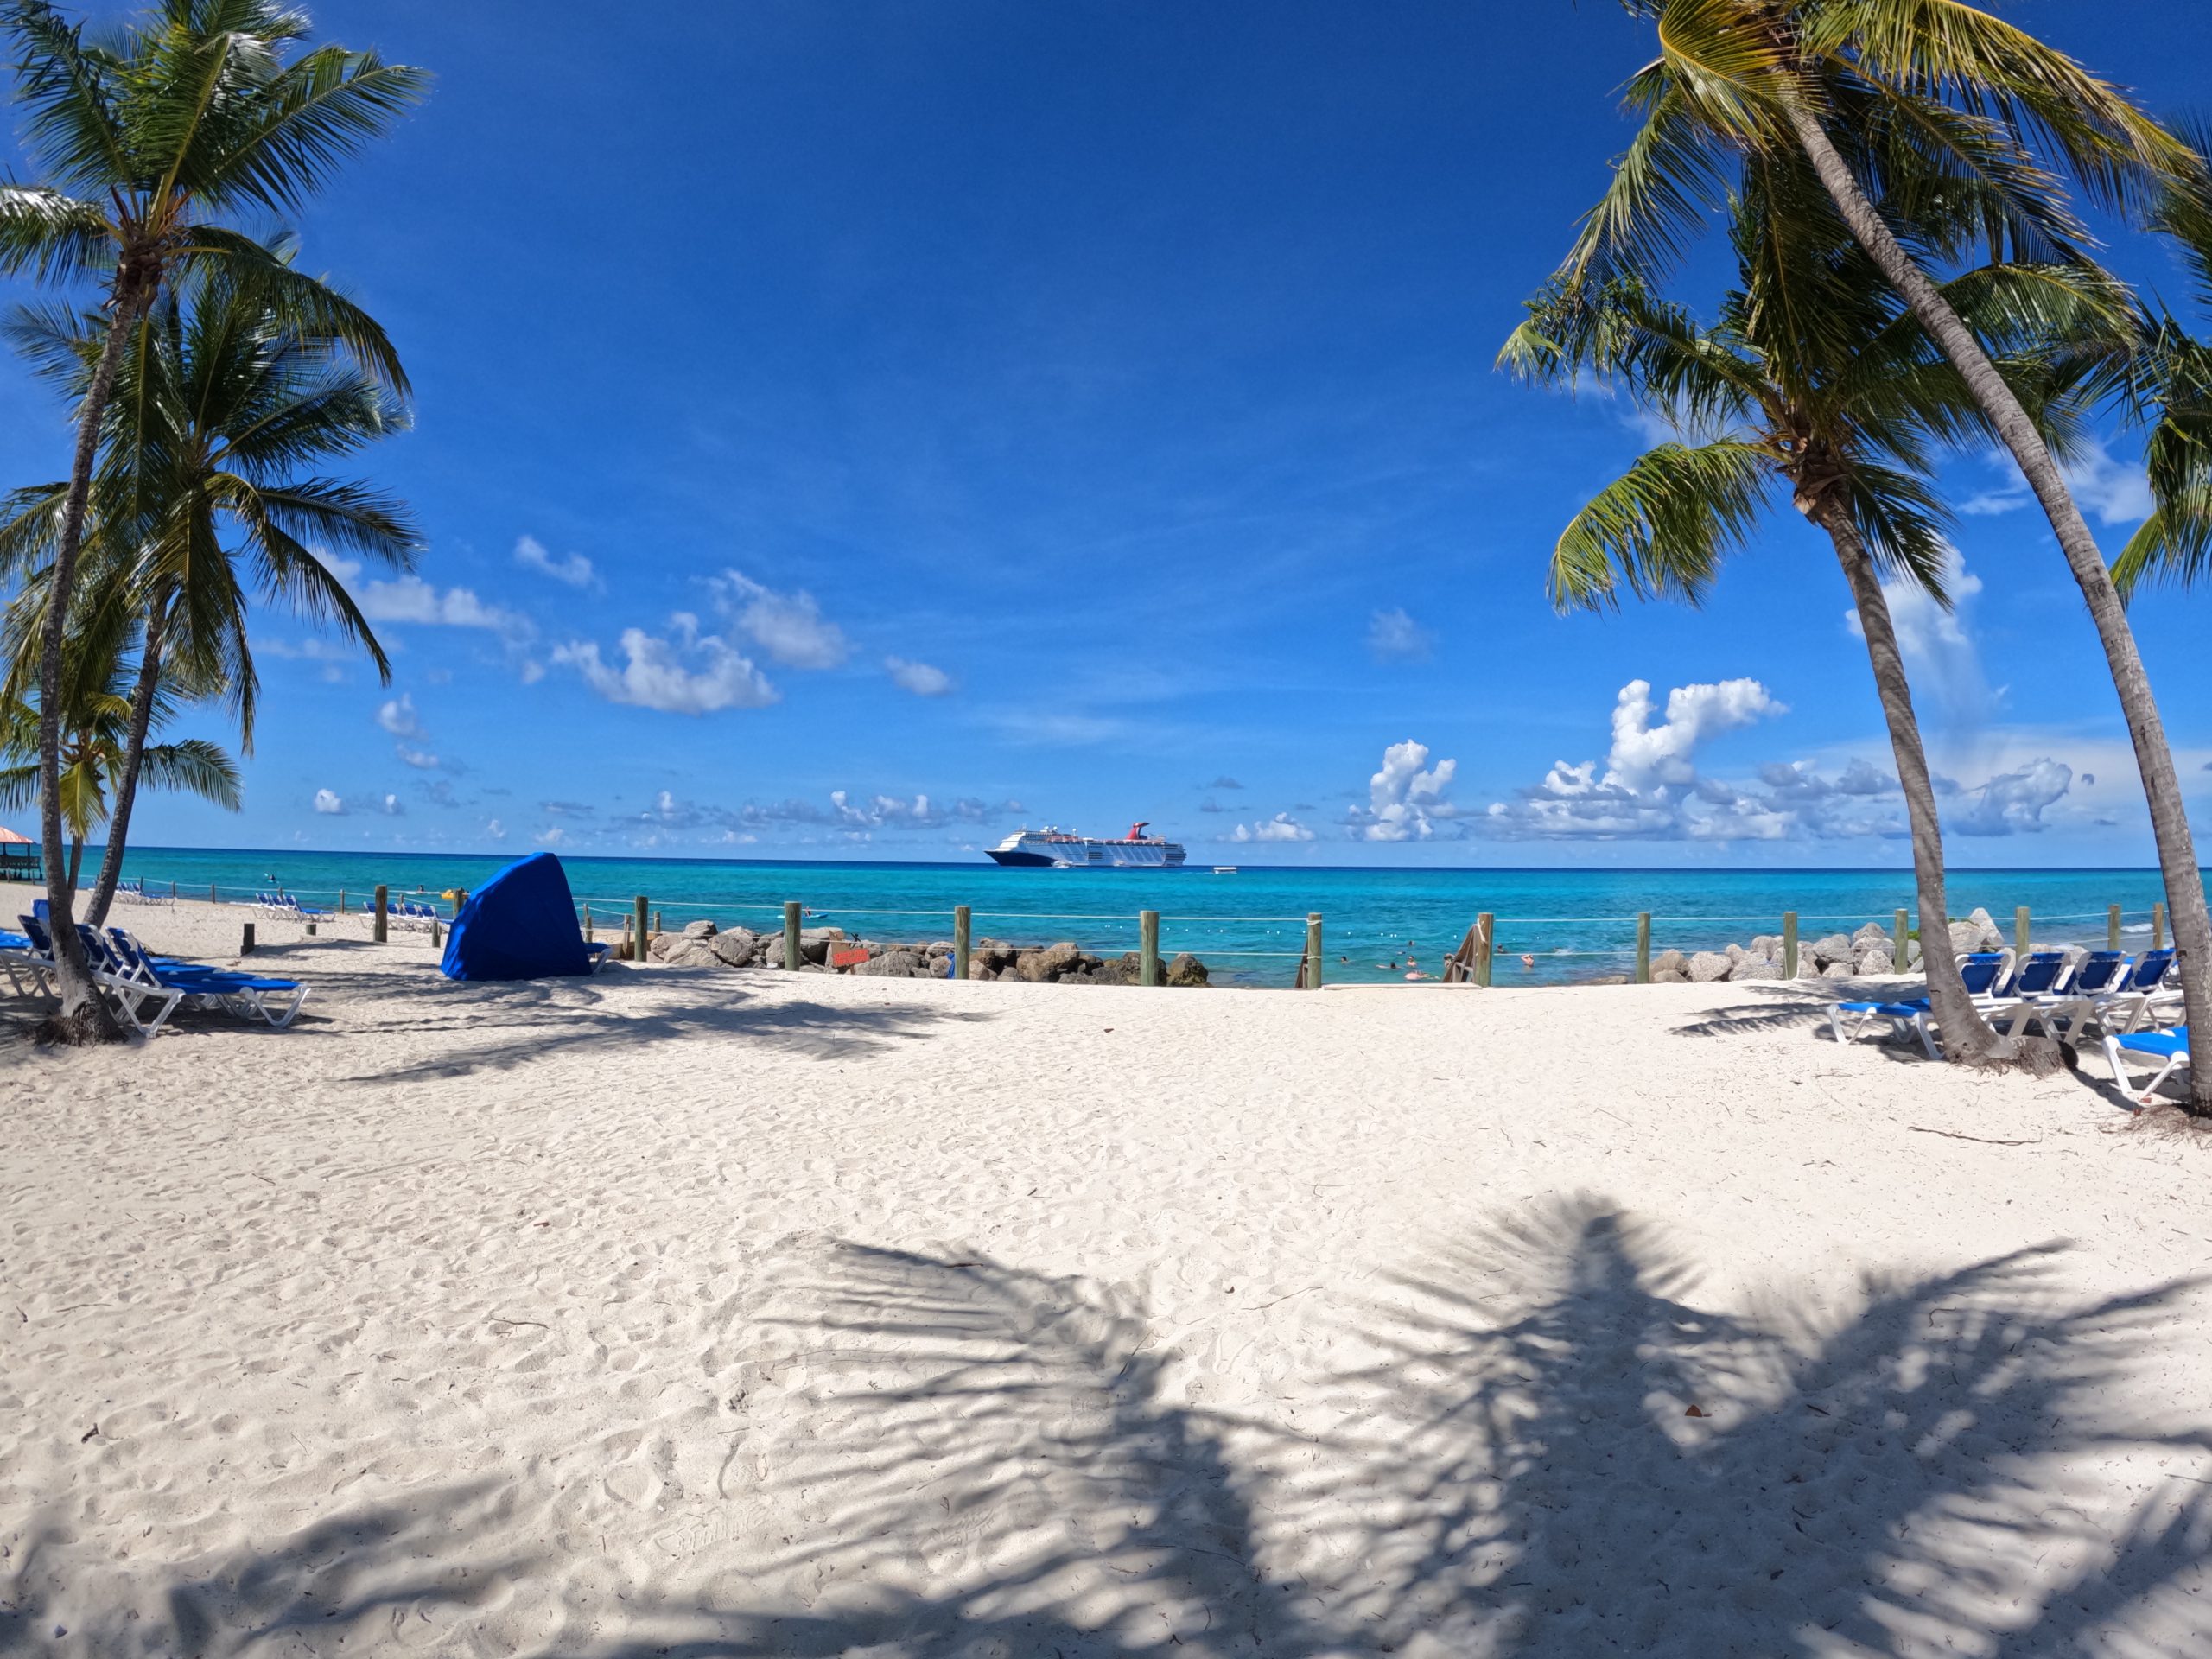 Cruise Destinations – All About Carnival’s Private Destination: Princess Cays